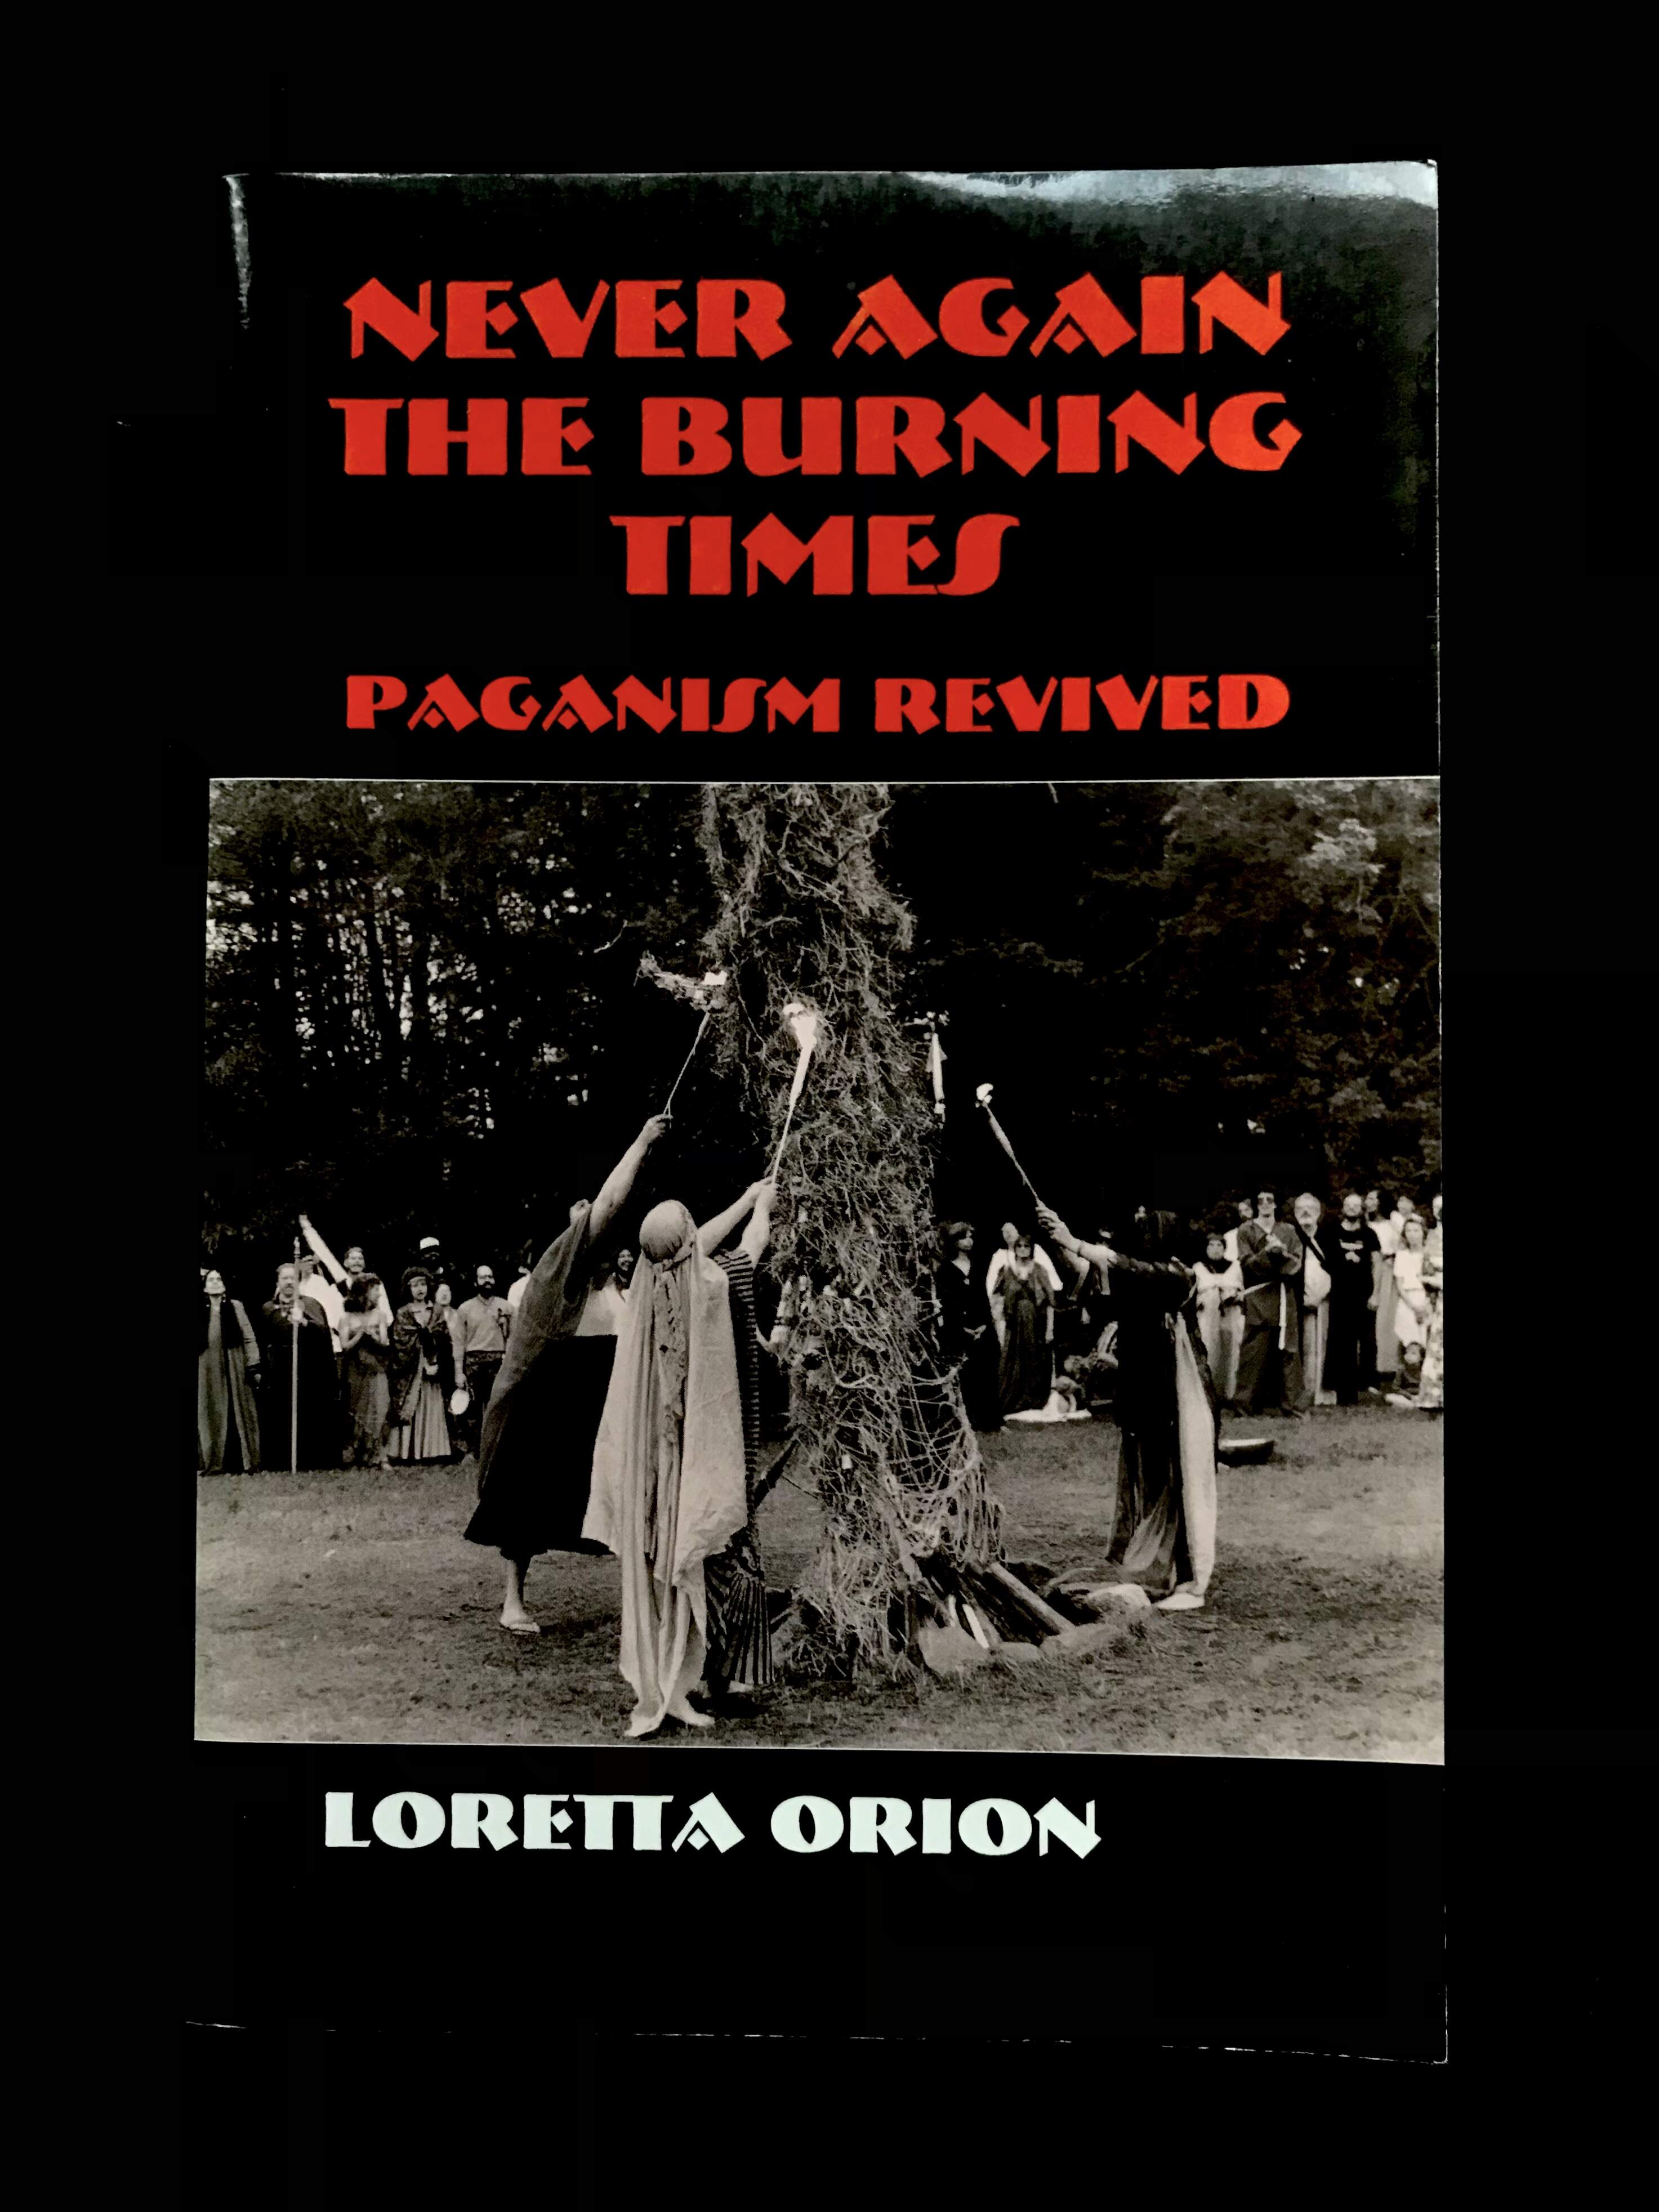 Never Again The Burning Times Paganism Revised by Loretta Orion